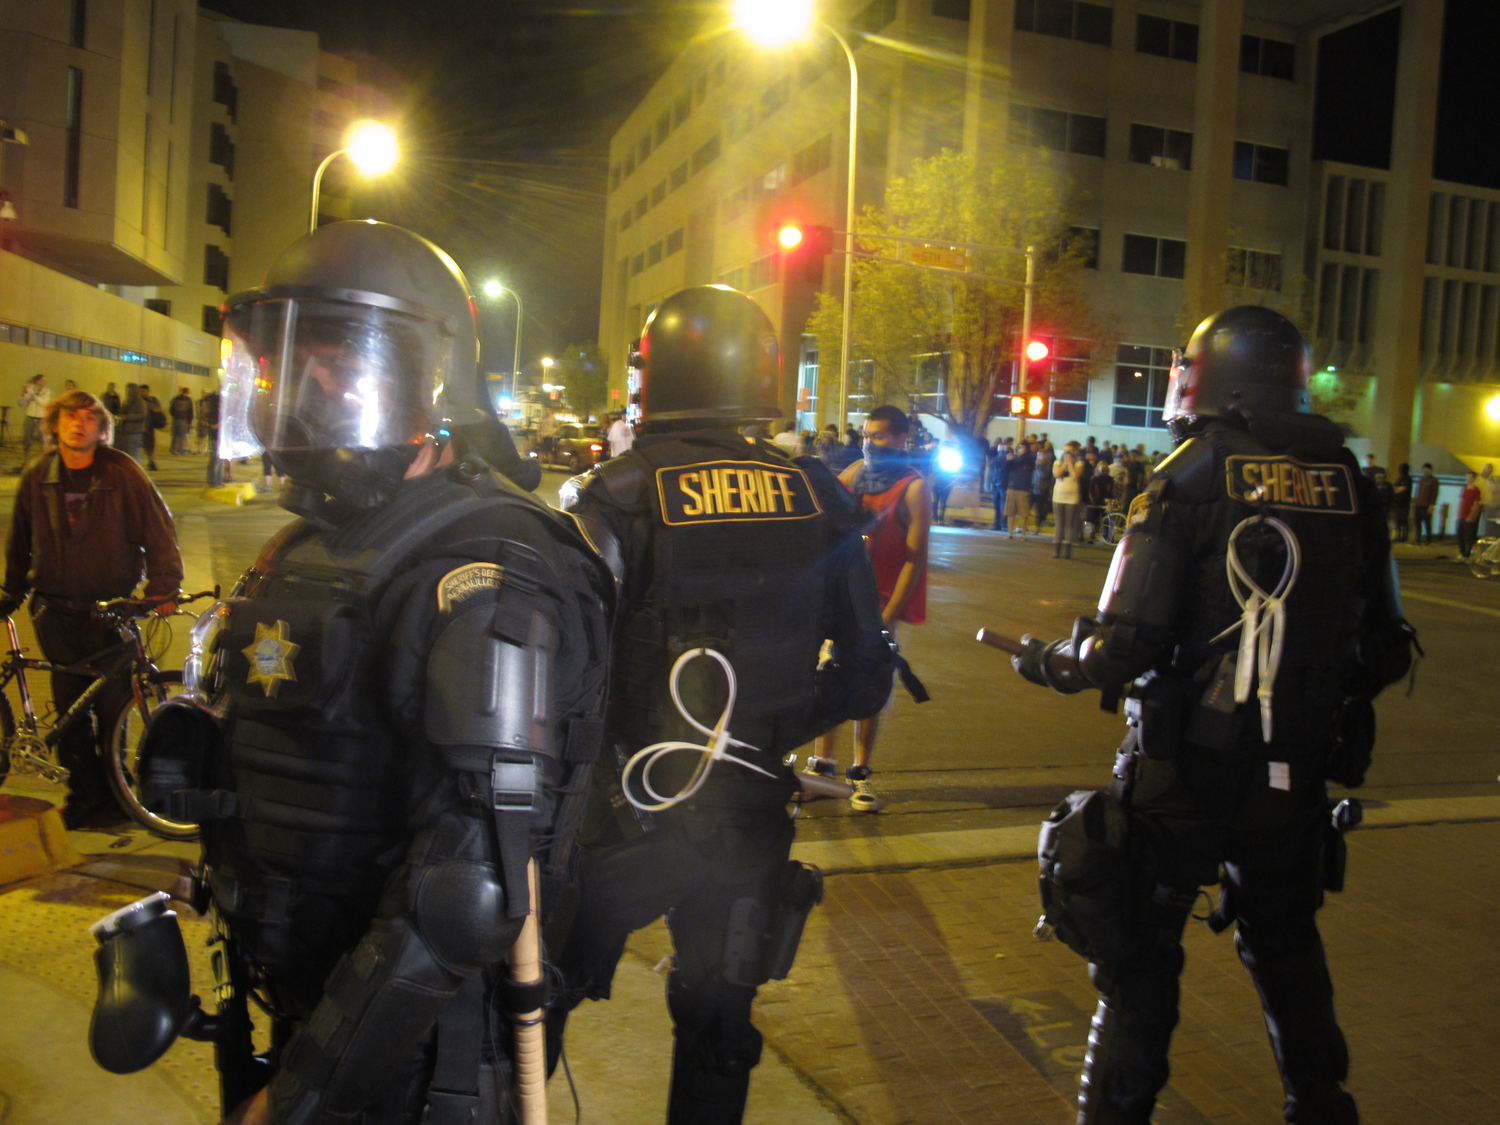 Riot police stand guard in front of protesters in downtown Albuquerque, N.M., Sunday, March 30,2014. (Russell Contreras - AP)